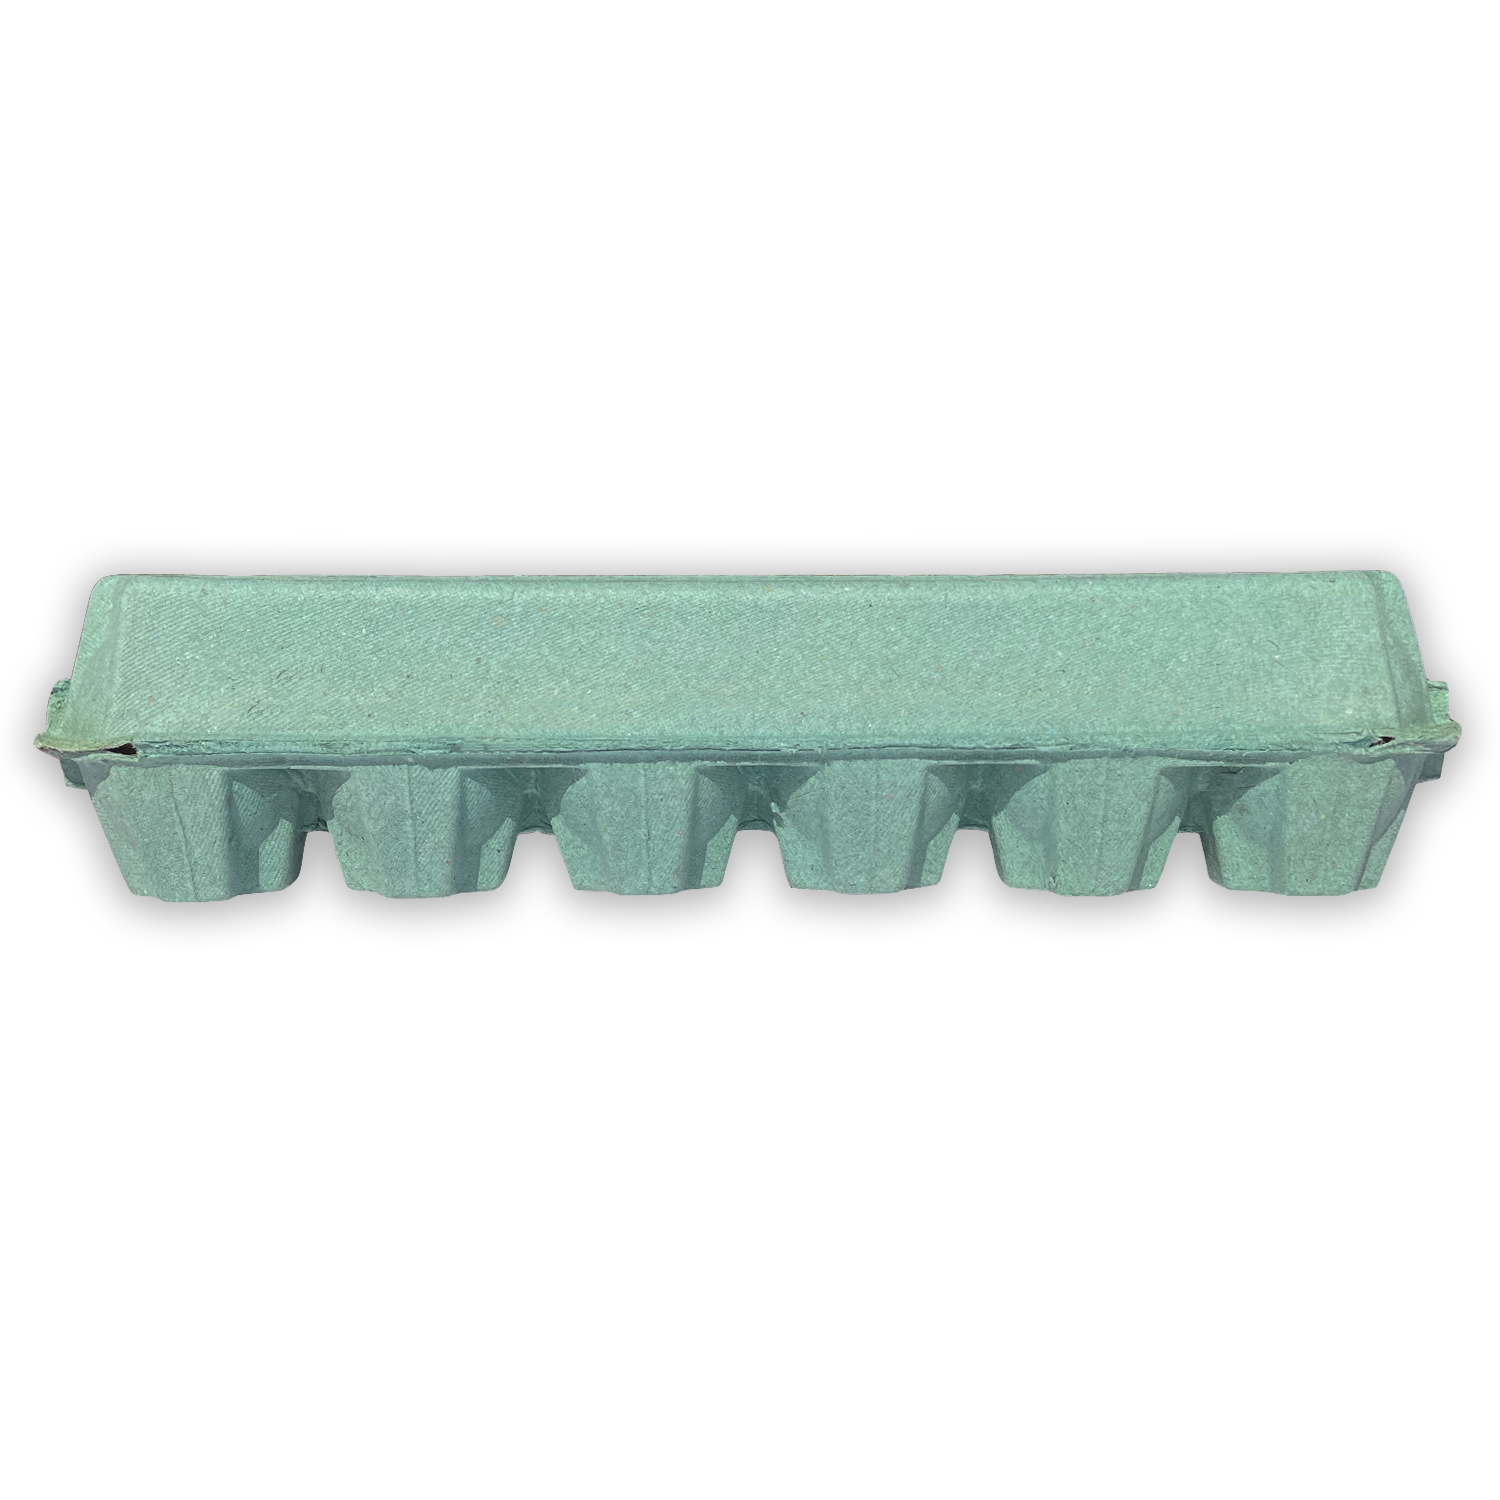 Turquoise Blue Square Paper Pulp Chicken Egg Cartons (12 eggs)